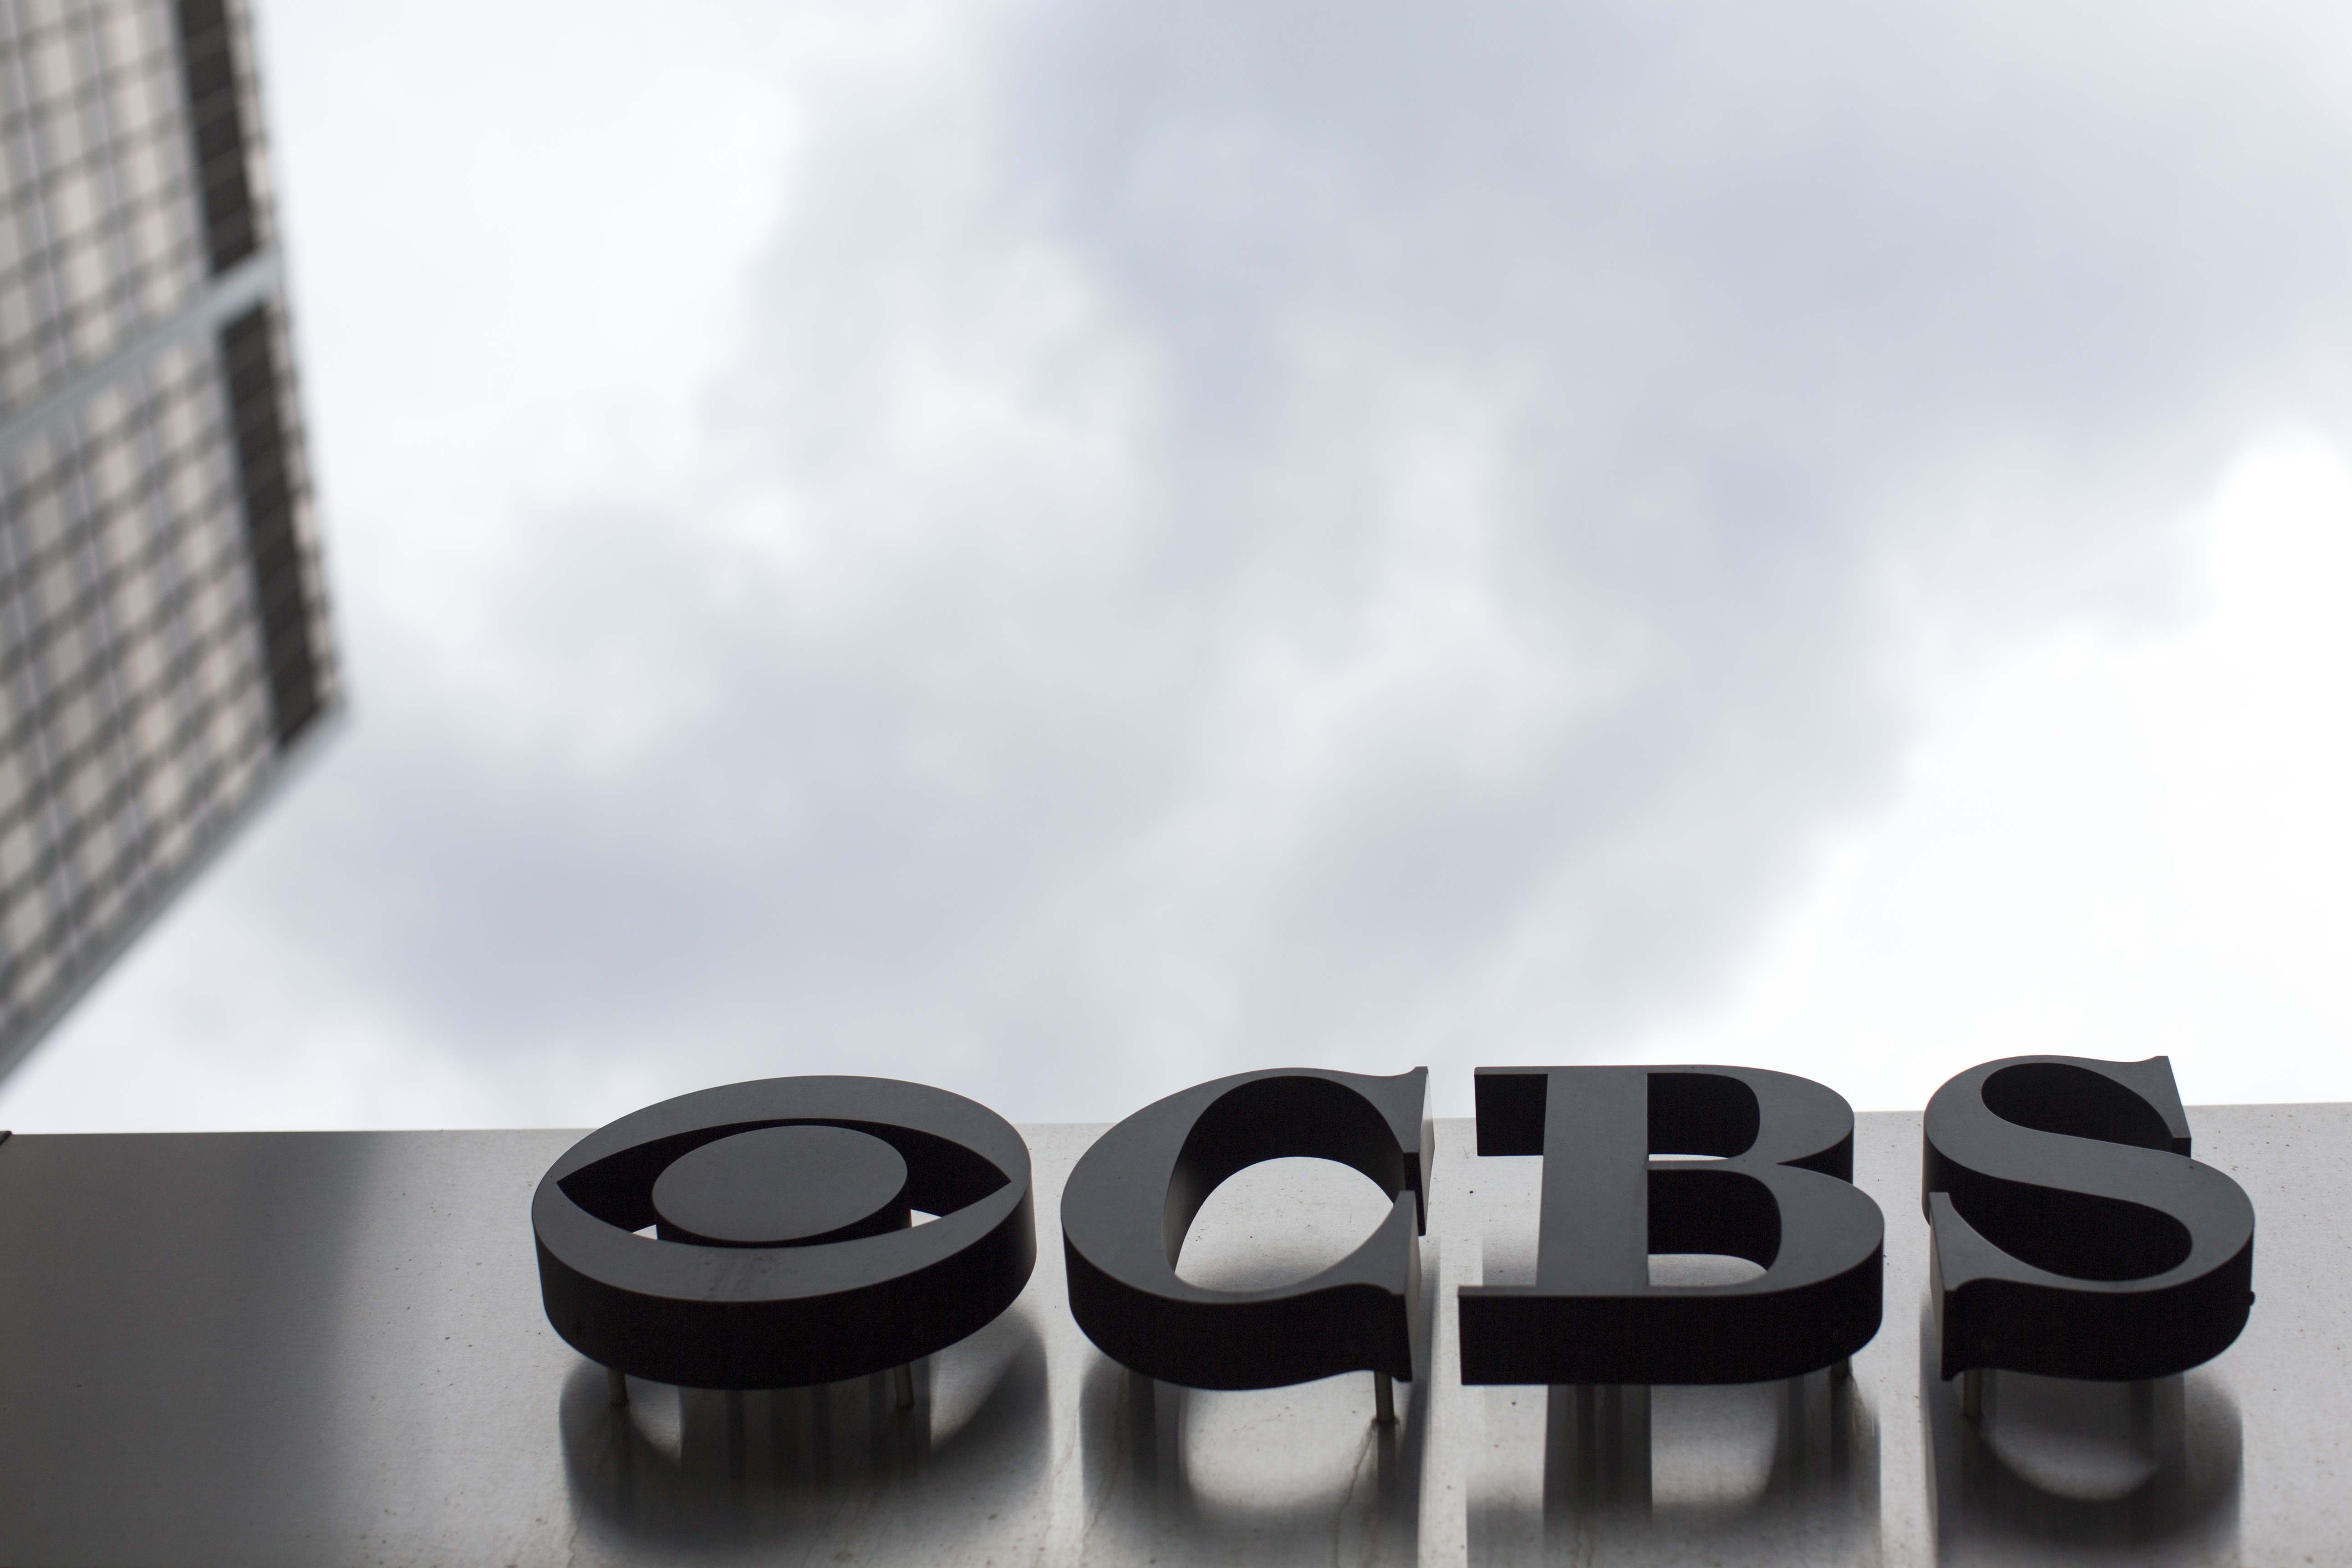 CBS News effort shows the growth in solutions journalism to combat